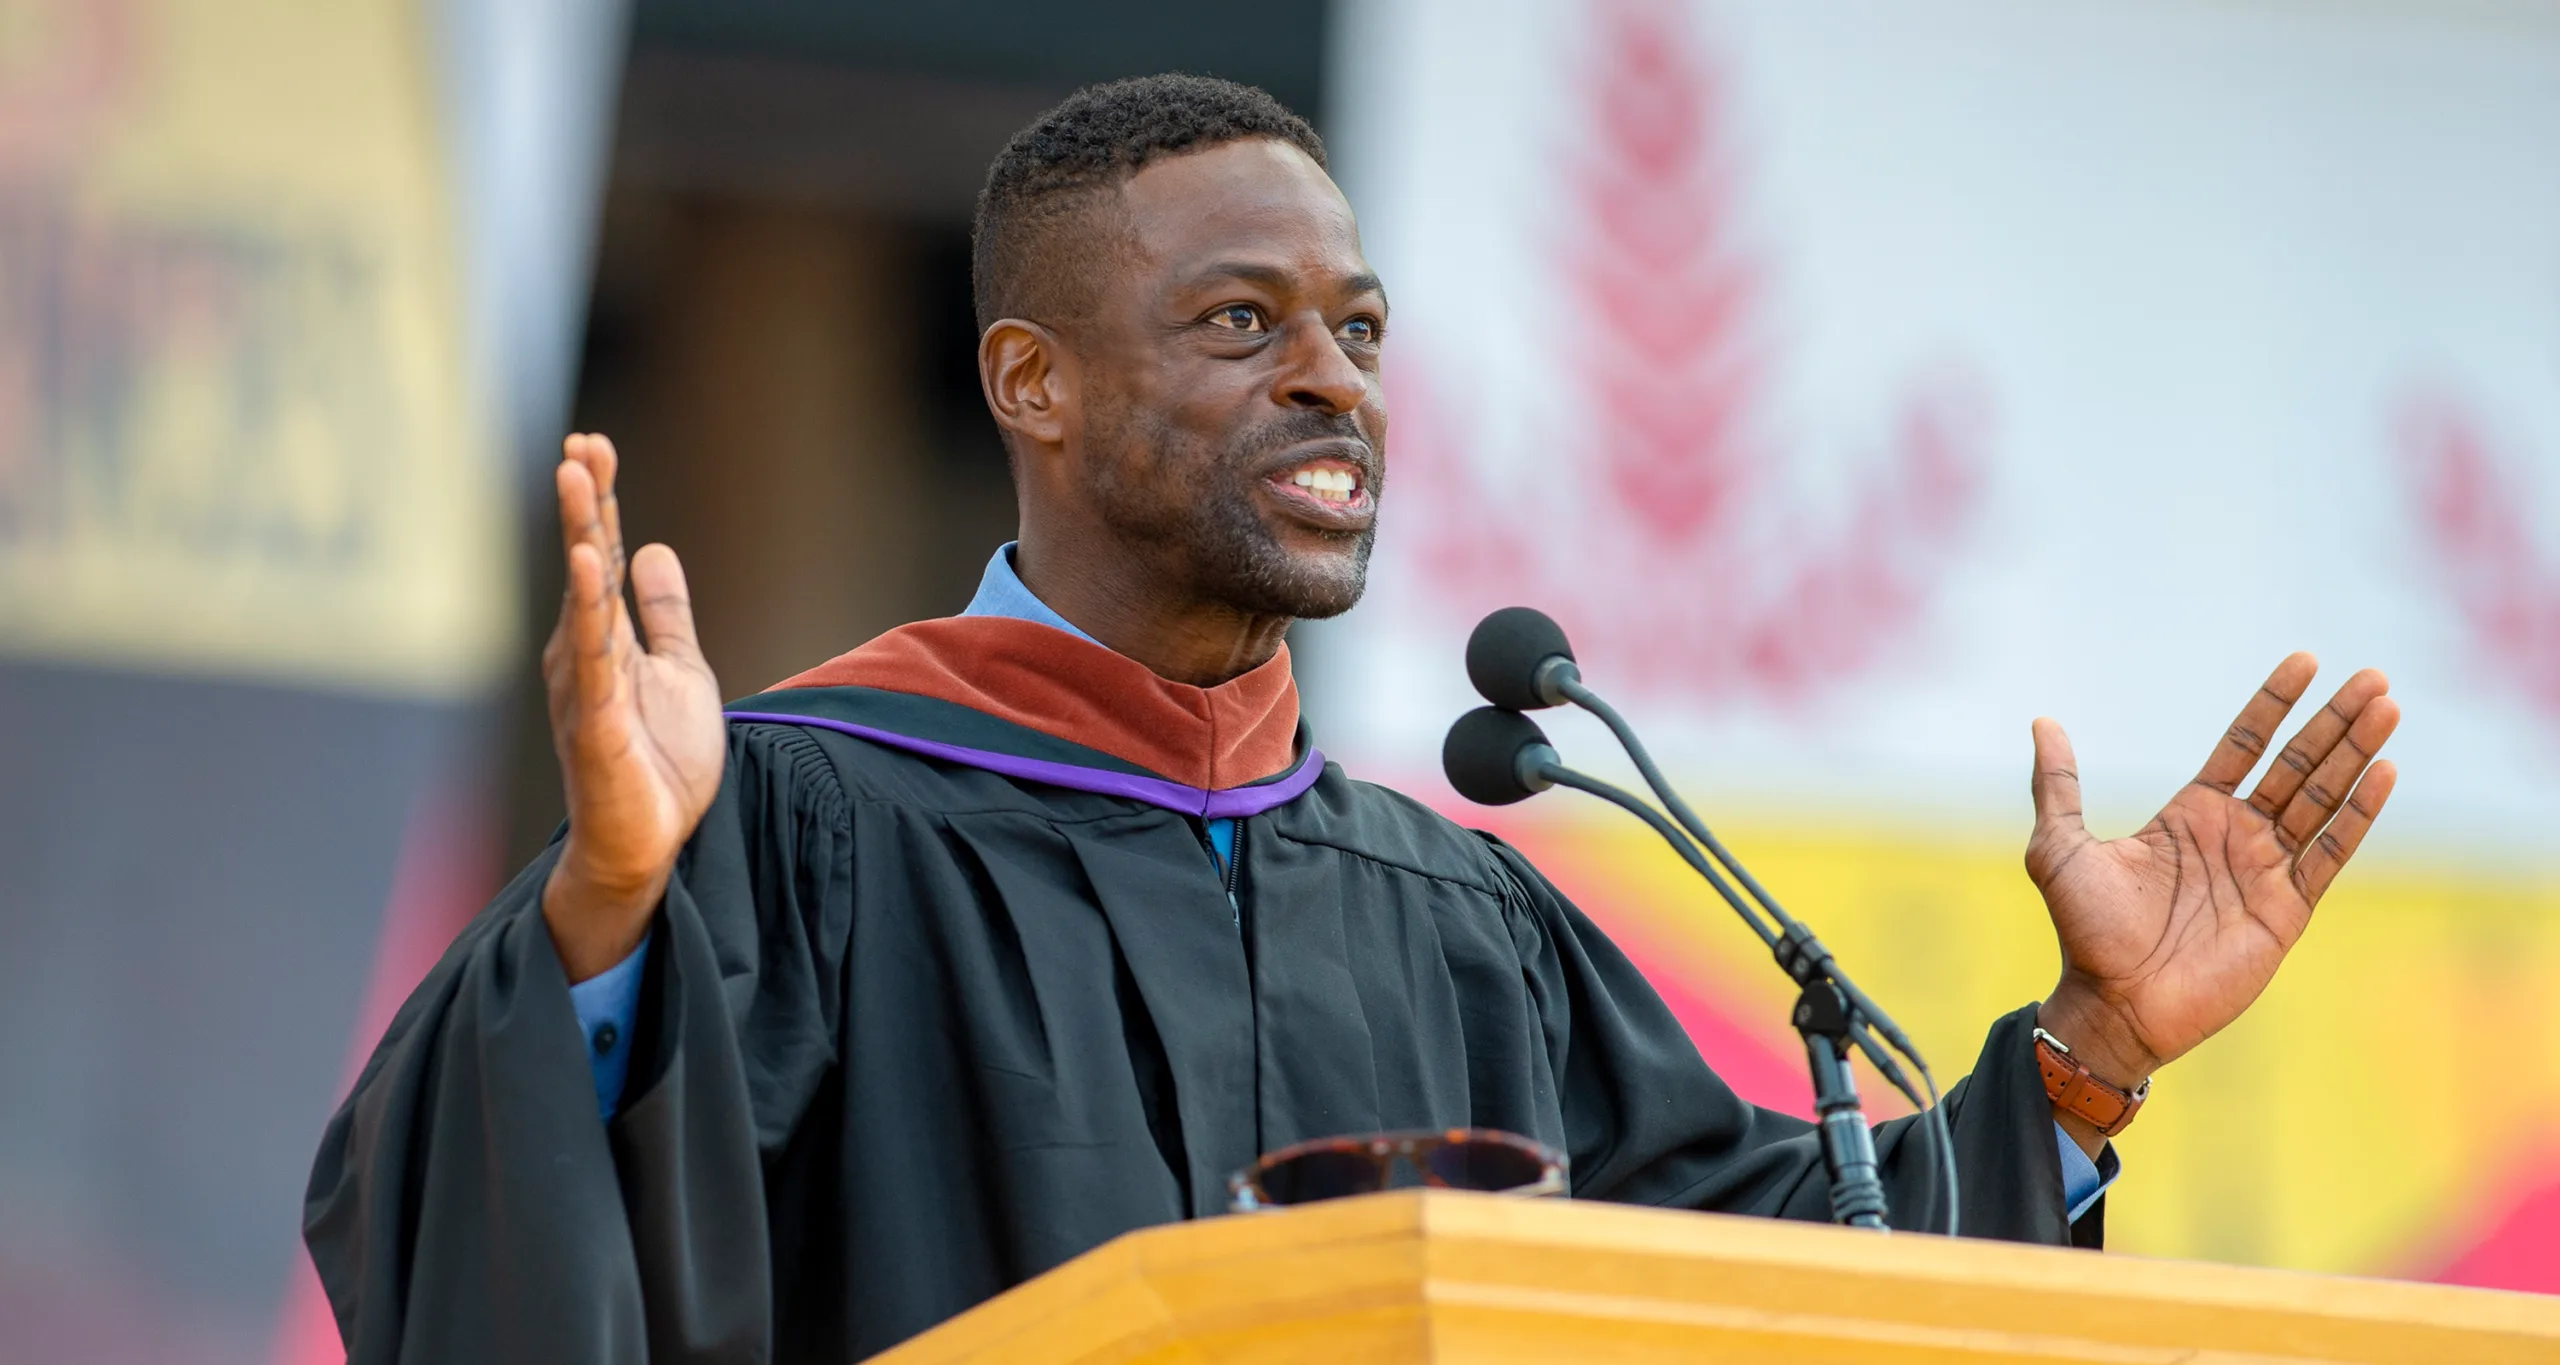 Actor and Stanford alumnus Sterling K. Brown